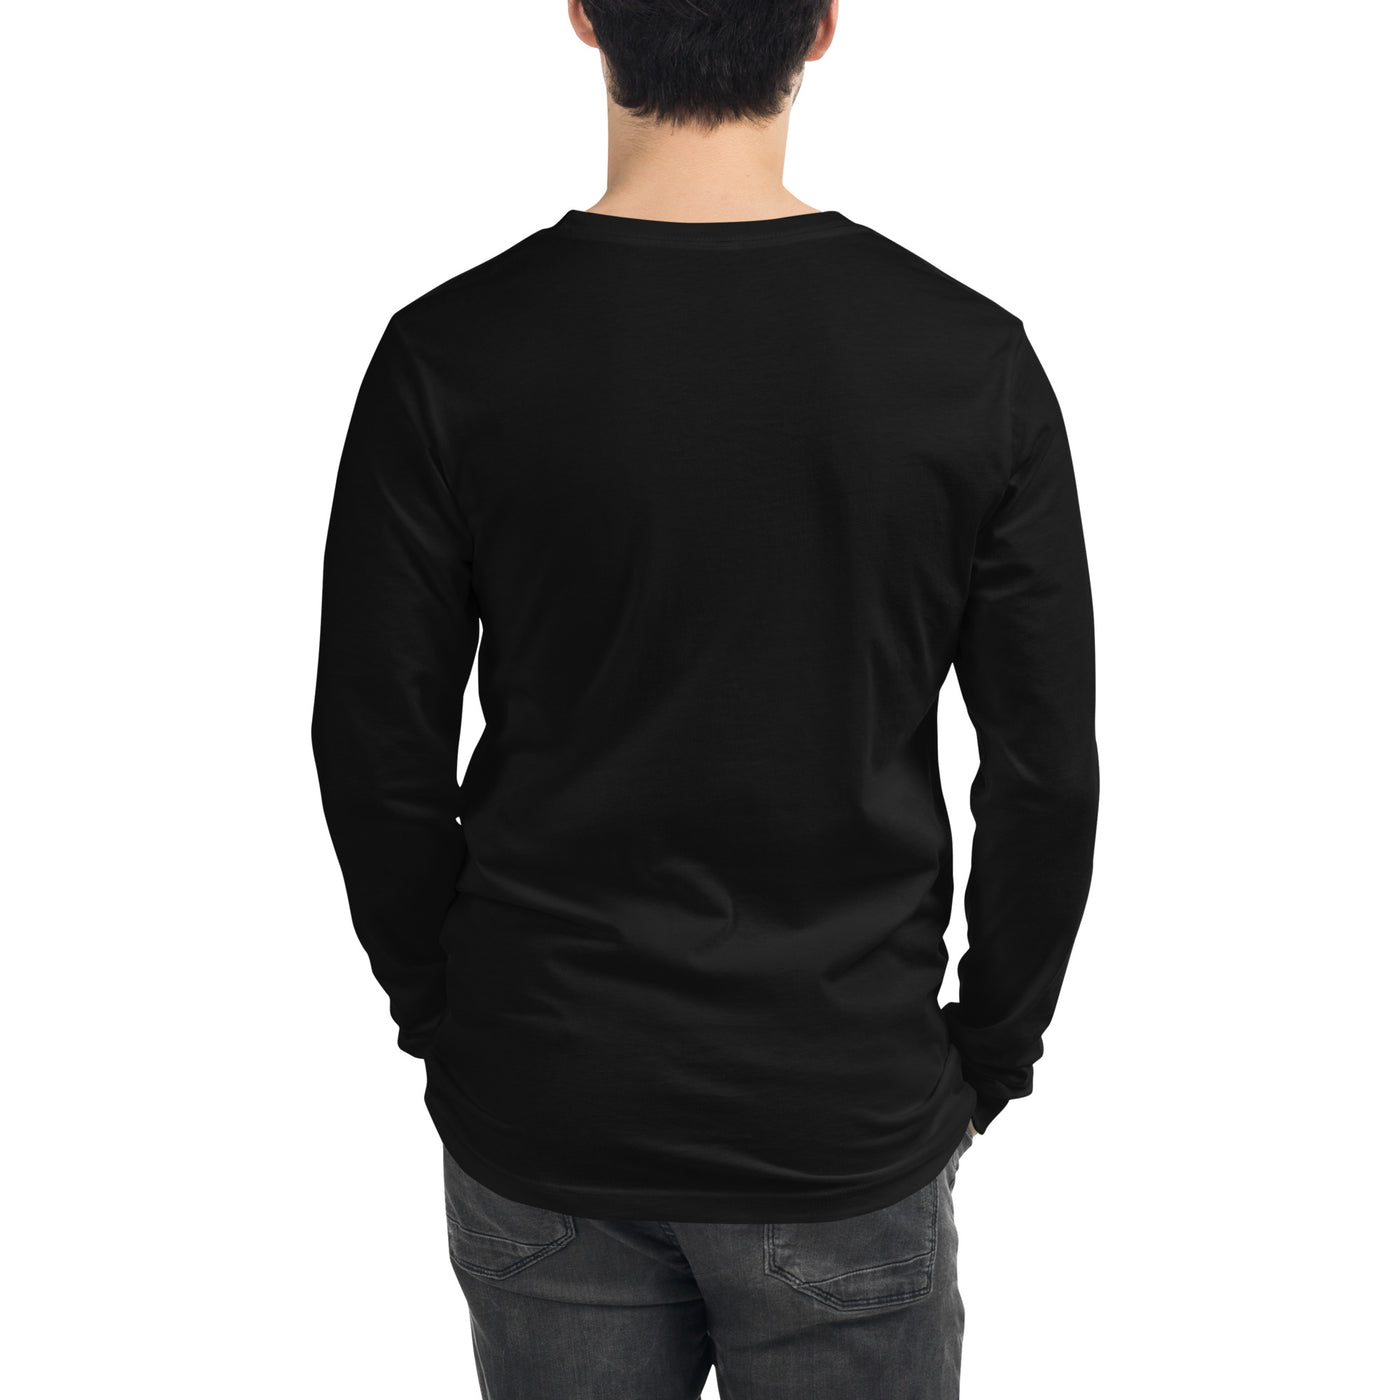 W - trident Long Sleeve Shirt Embroidery